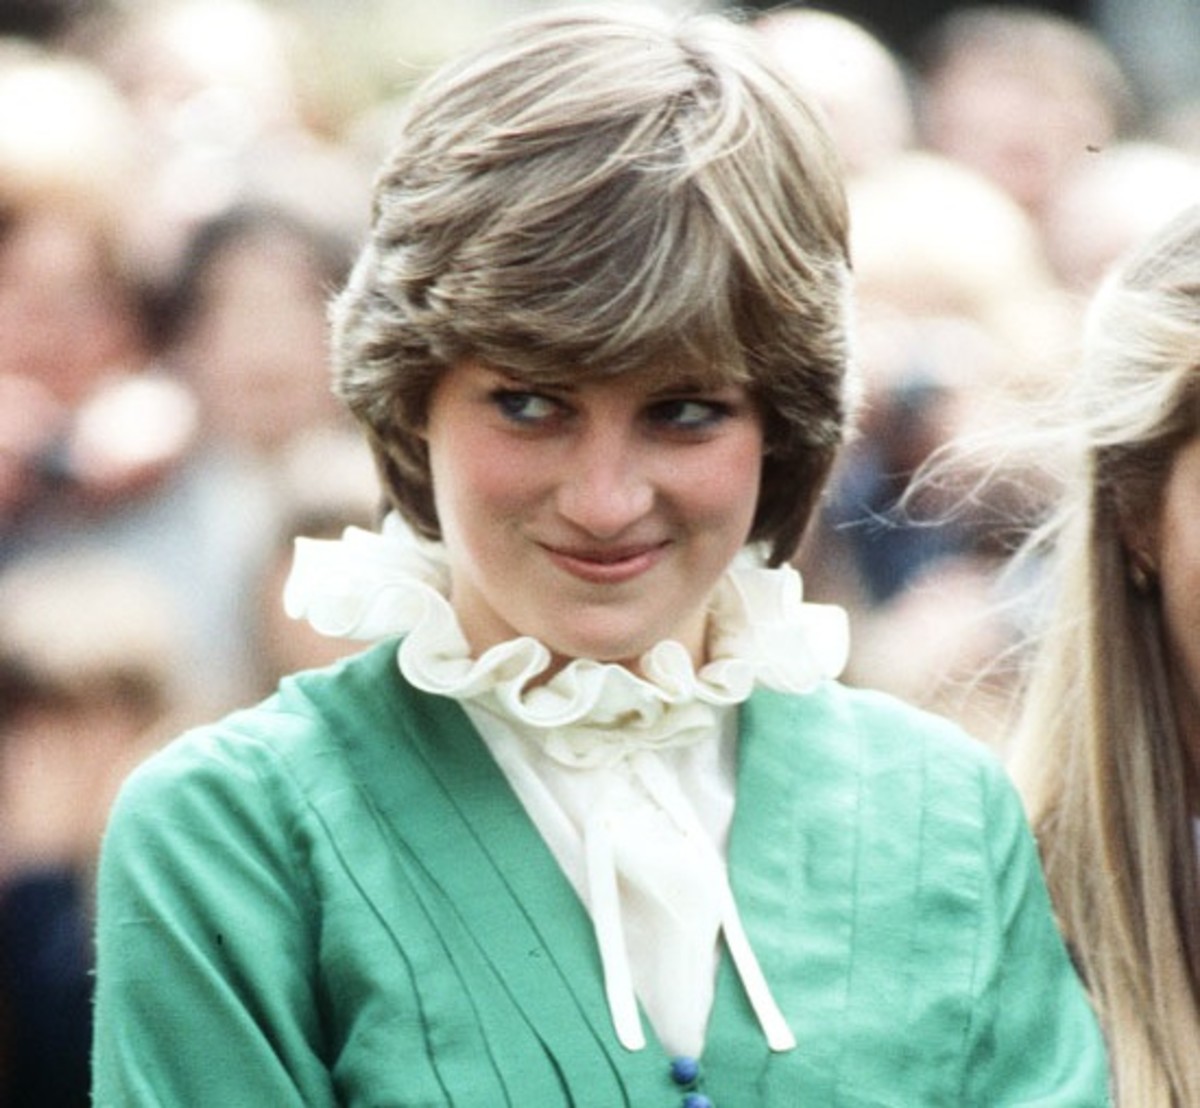 15 Fascinating Facts About Princess Diana's Childhood